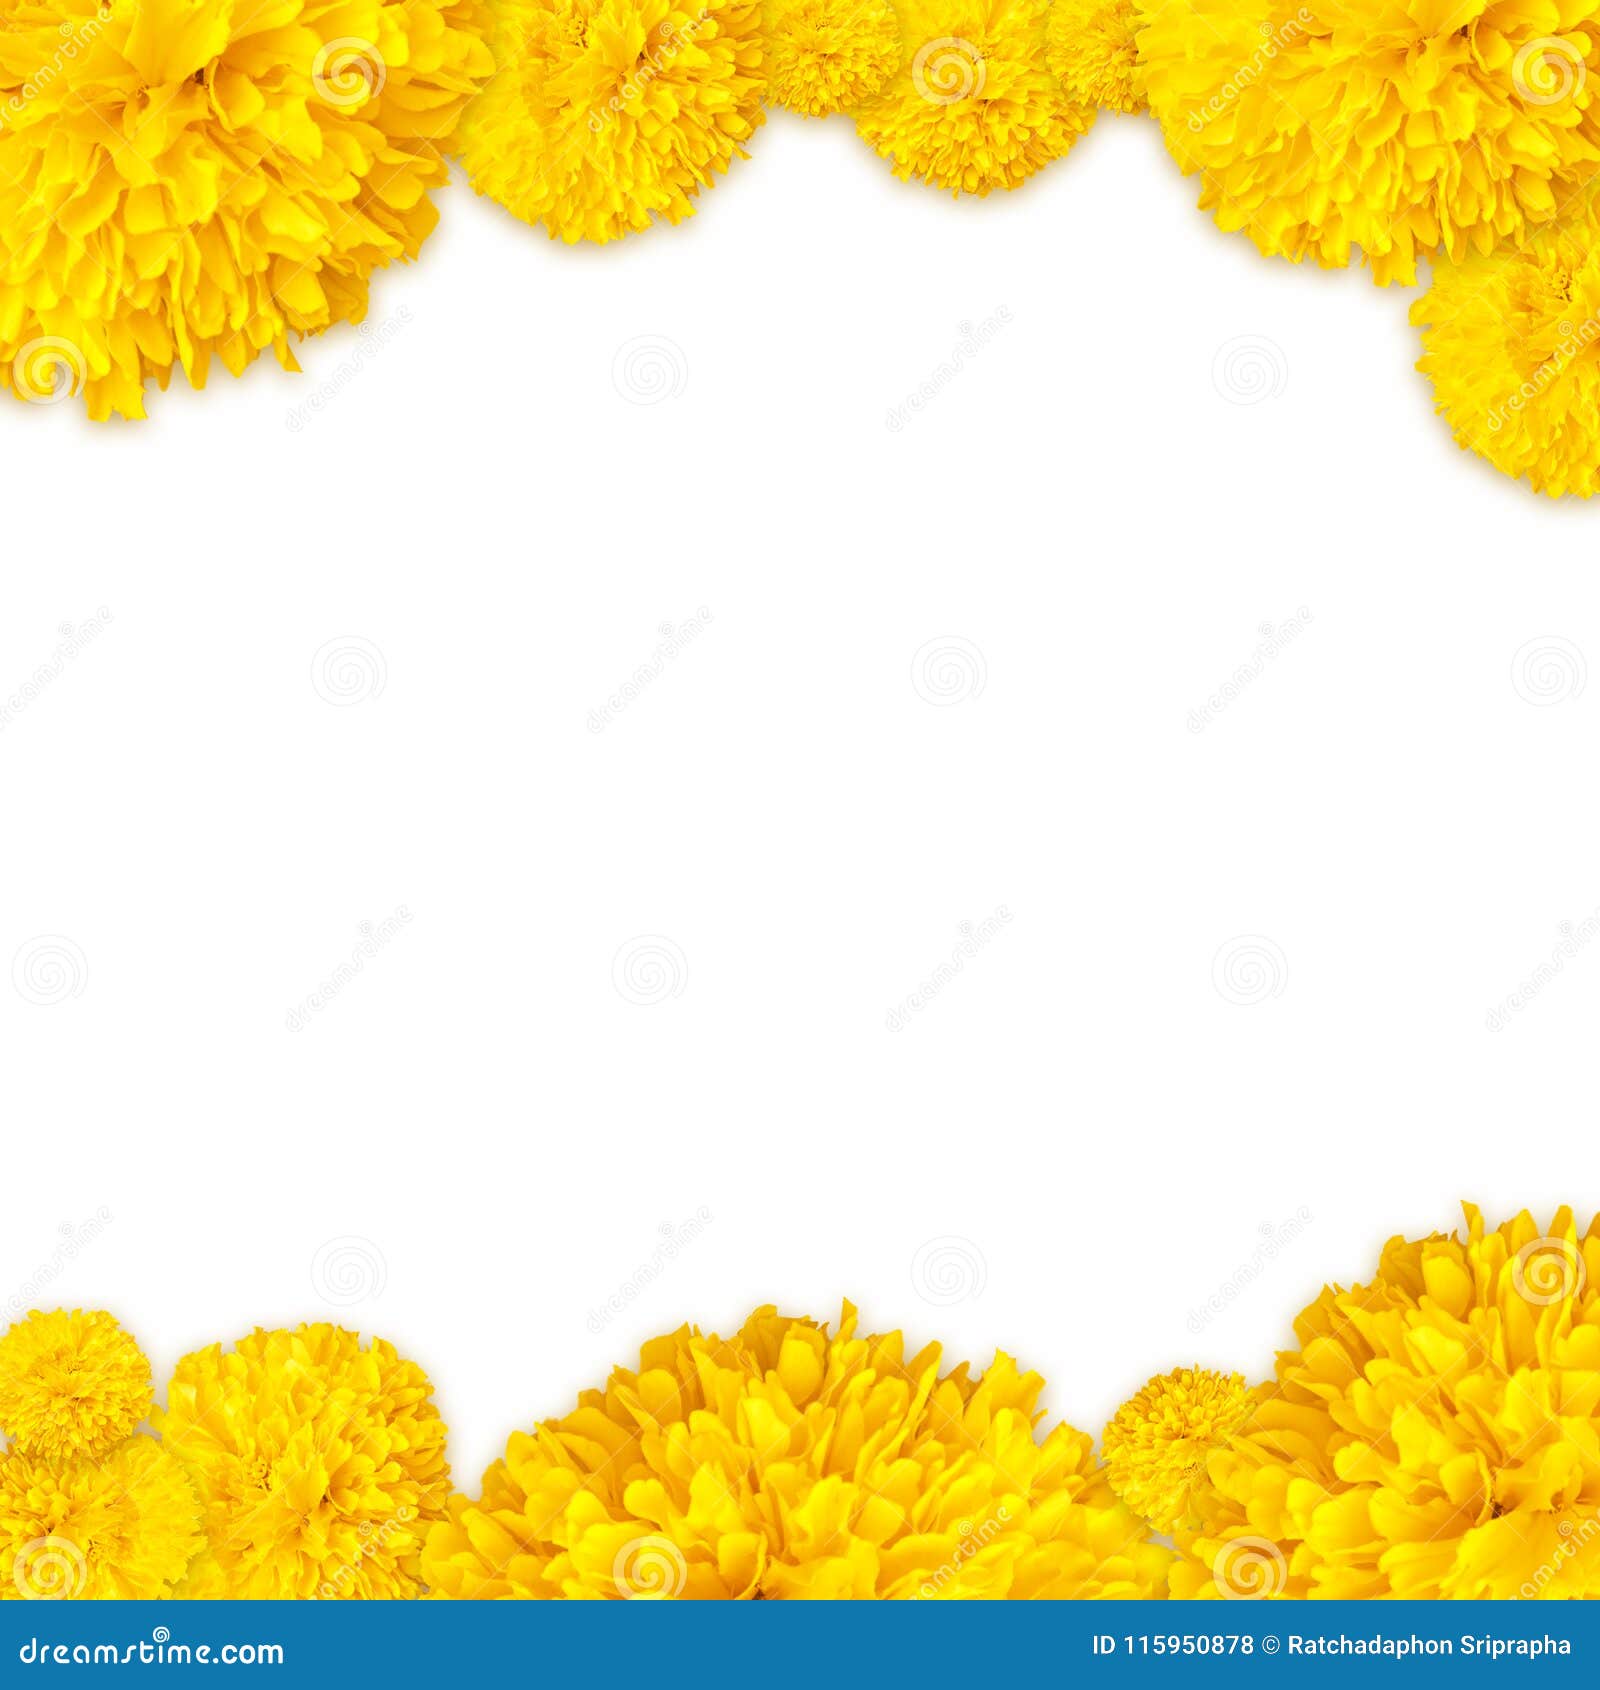 Frame of Yellow Marigold Flowers Frame Background Stock Photo - Image of  head, aztec: 115950878